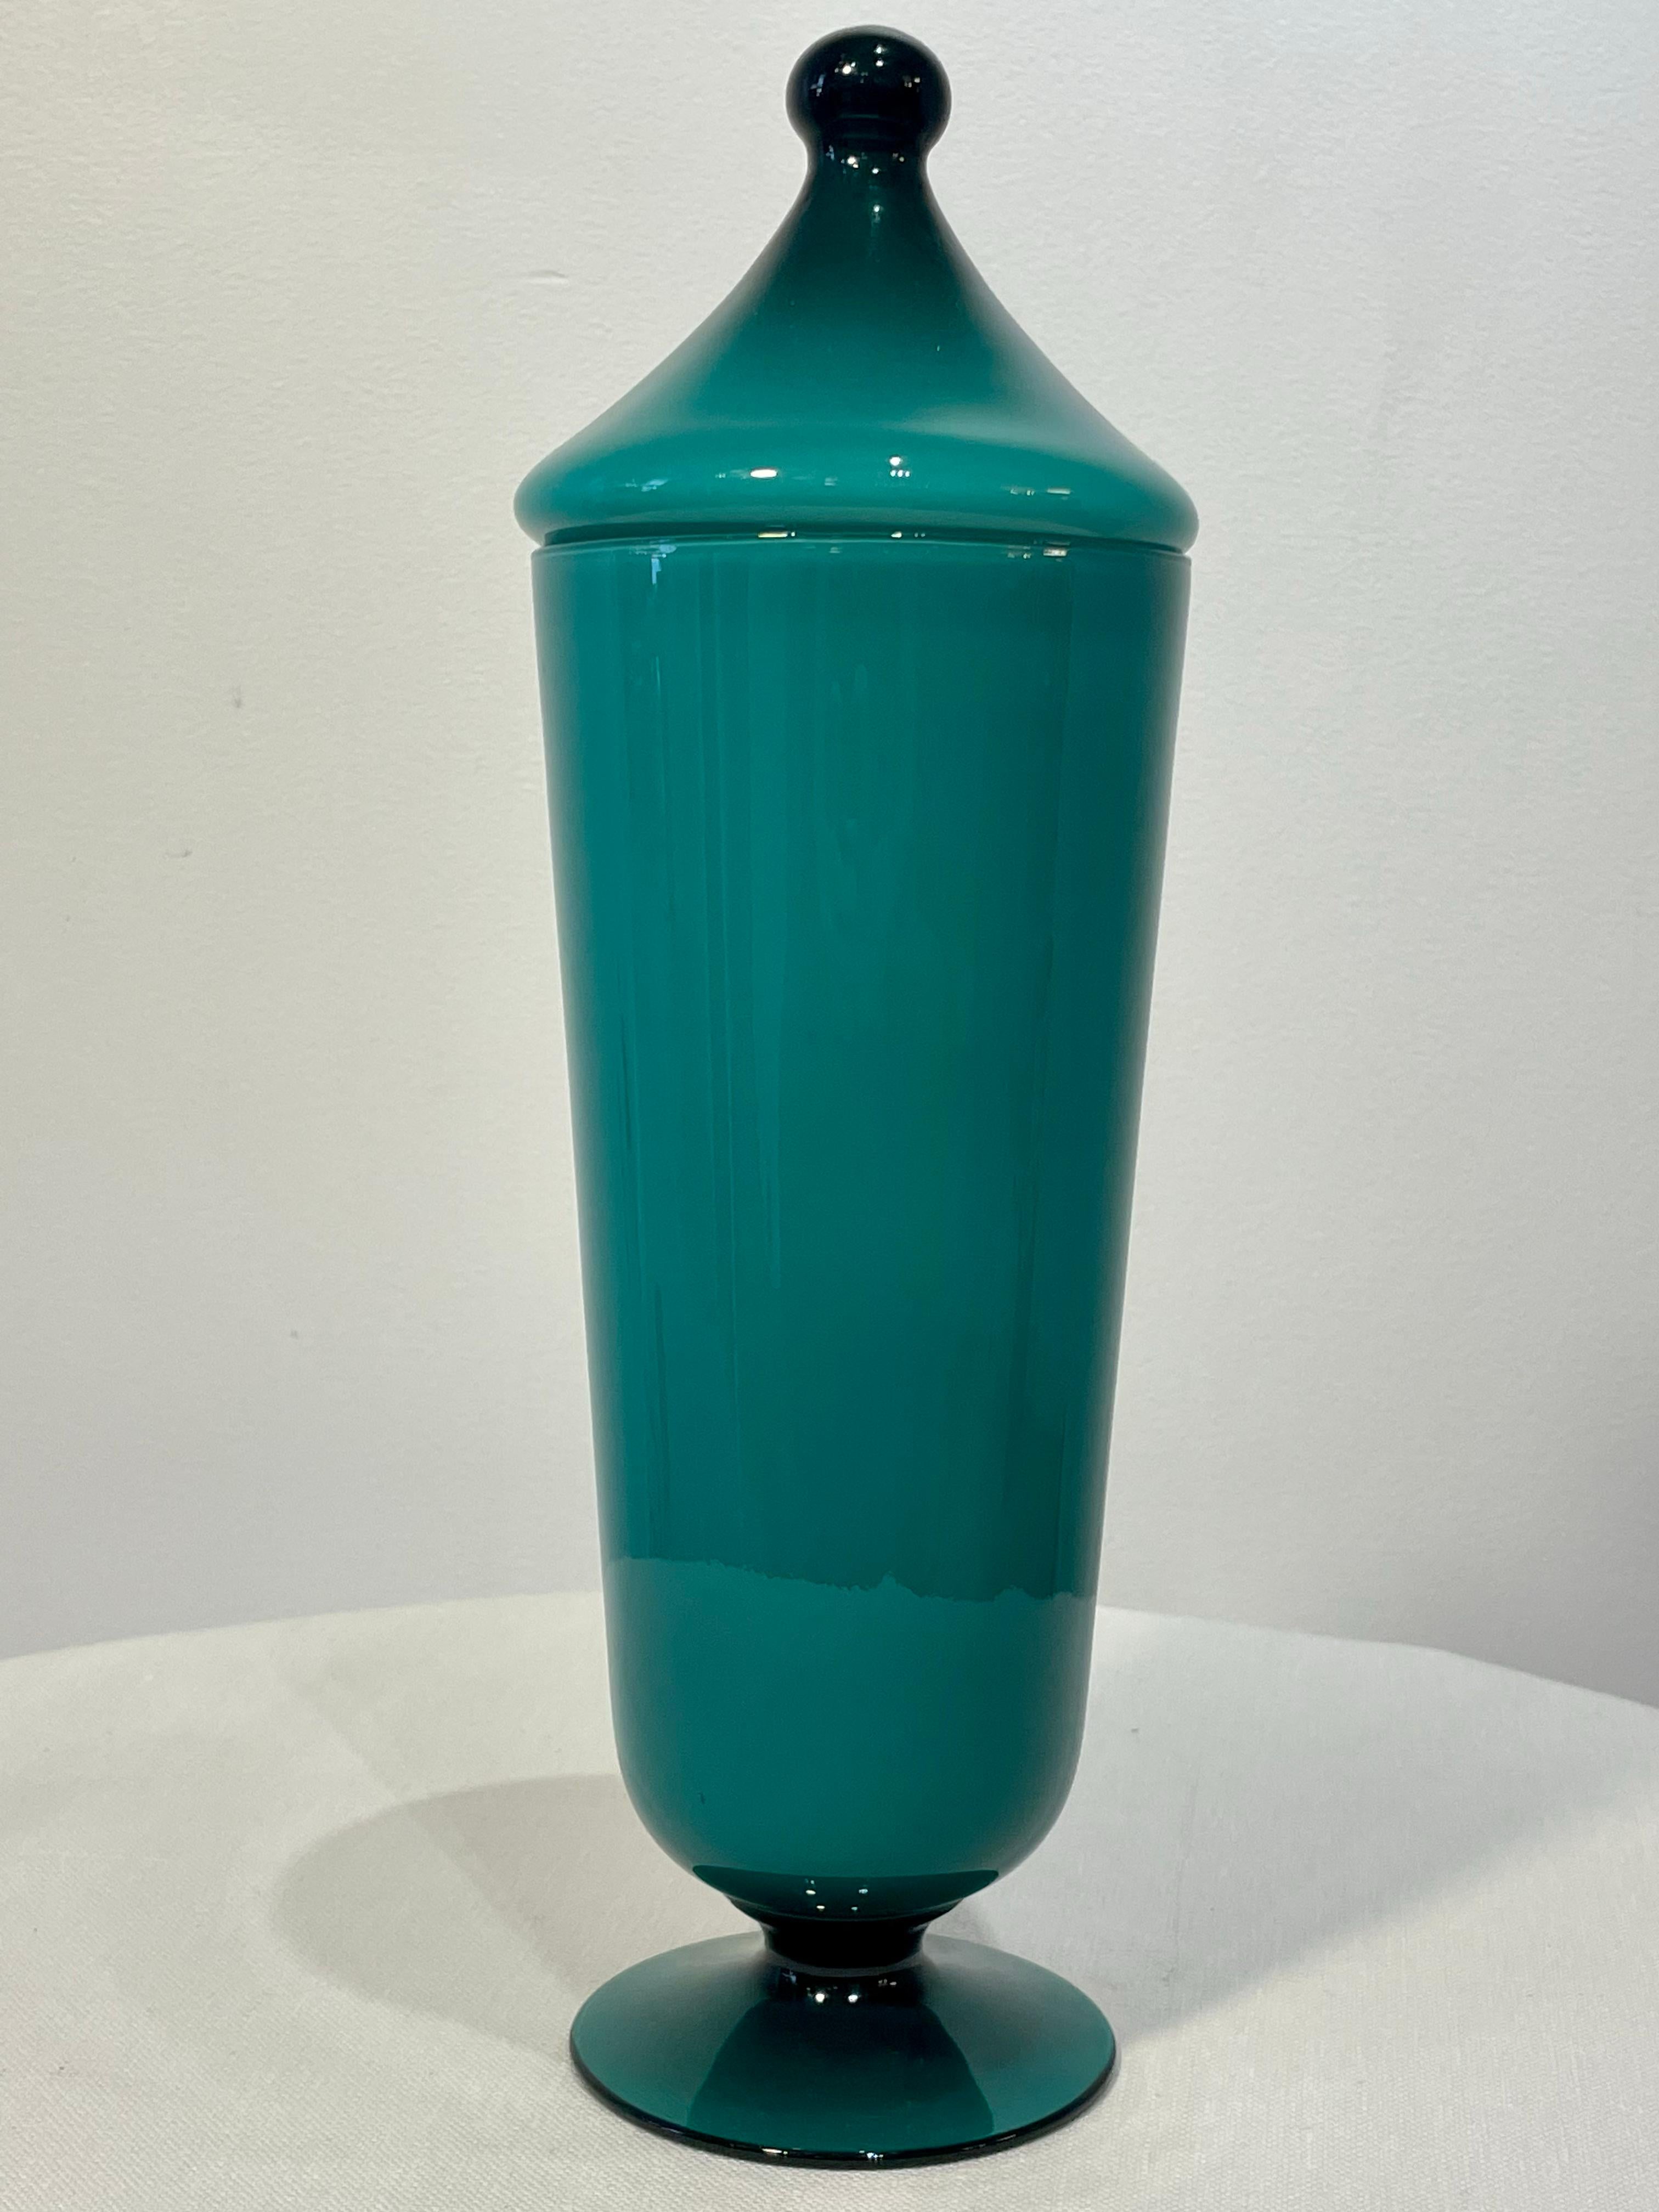 Turquoise Murano Glass Jar
Sourced from Italy.

